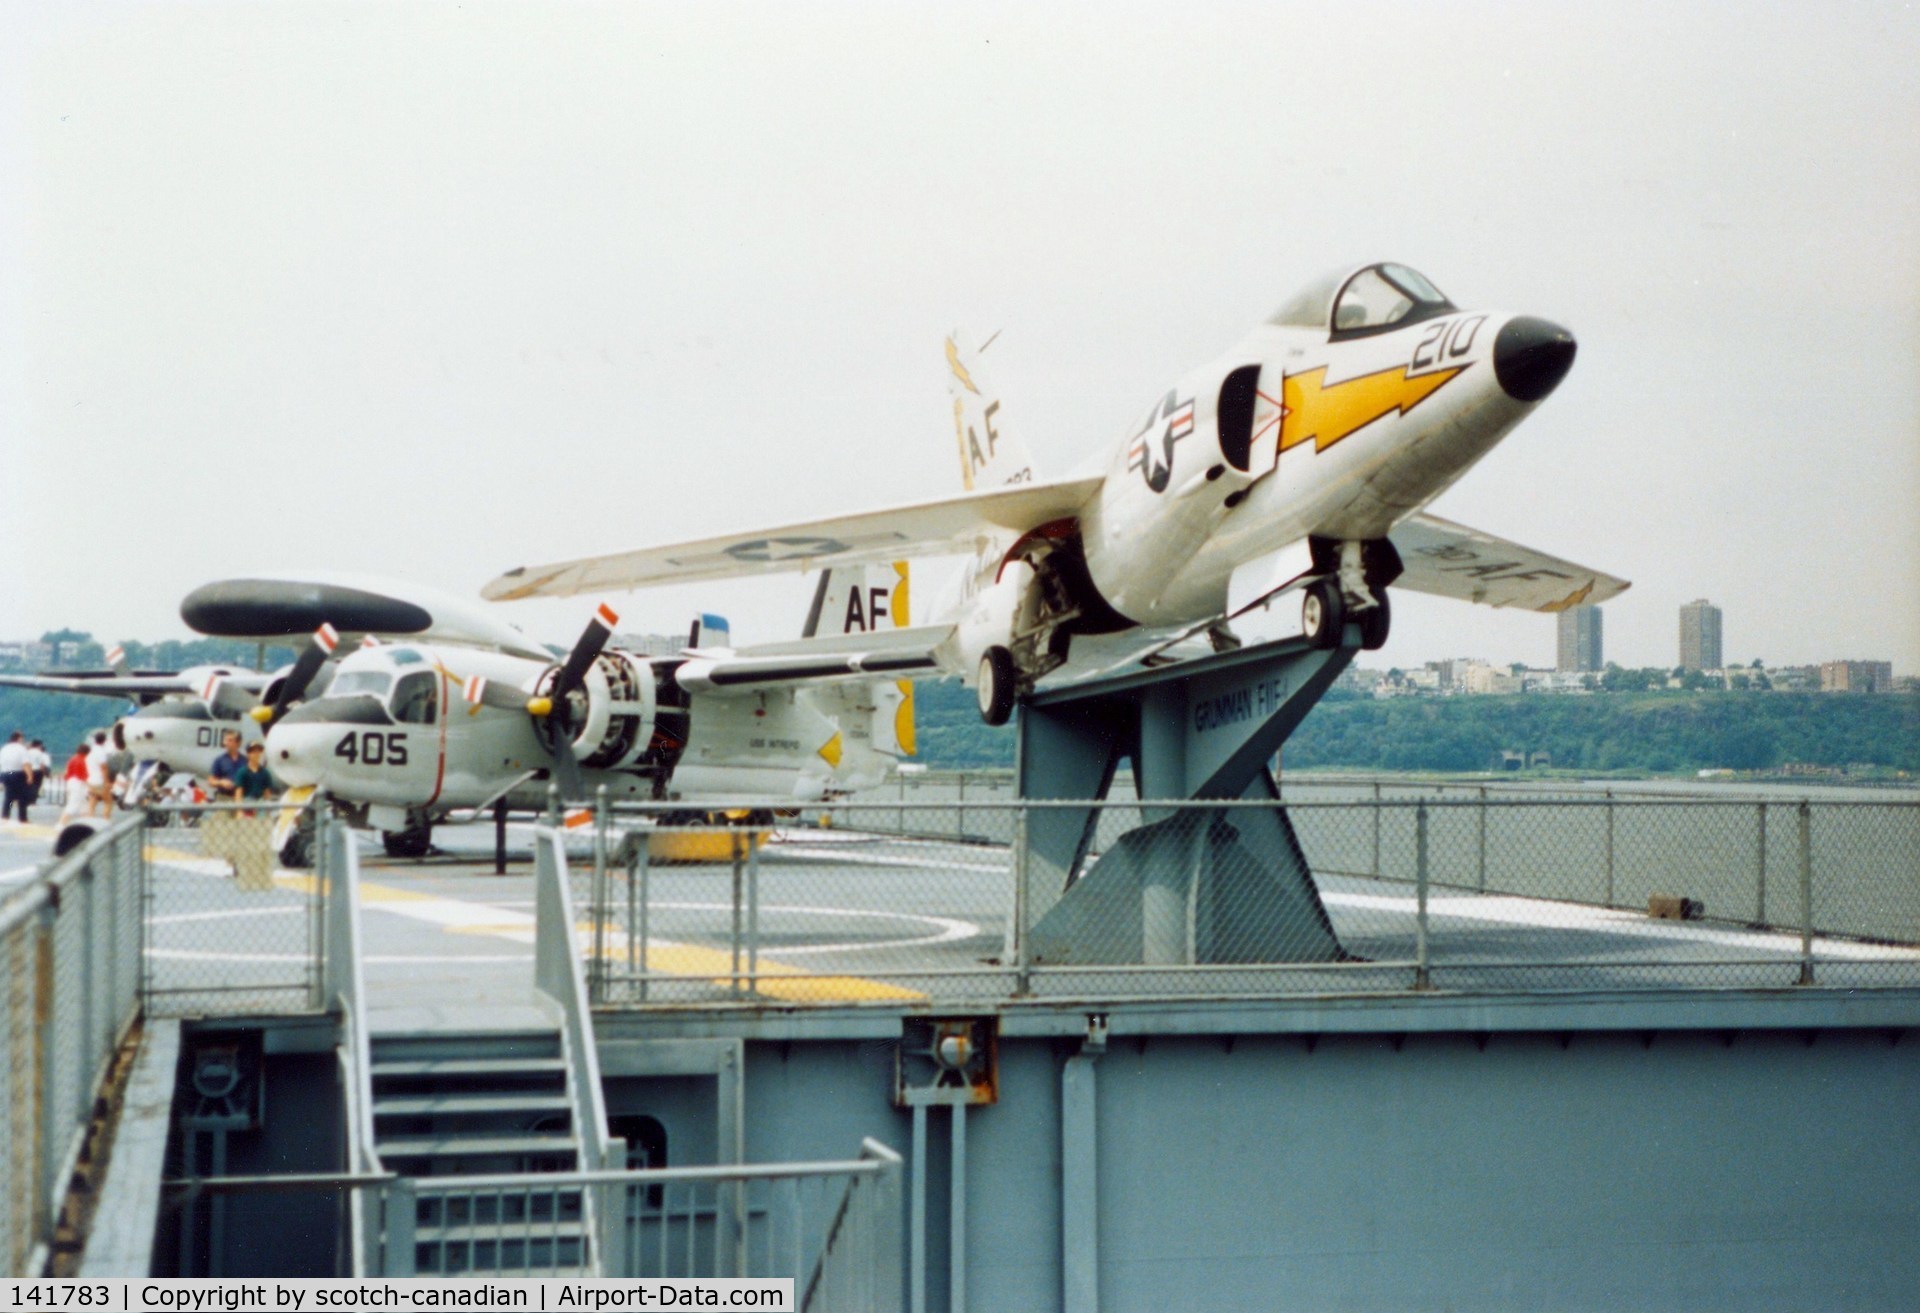 141783, Grumman F-11A Tiger C/N 100, Grumman F11F-1 Tiger S/N 141783 at the Intrepid Sea-Air-Space Museum, New York City, NY - circa early 1990's